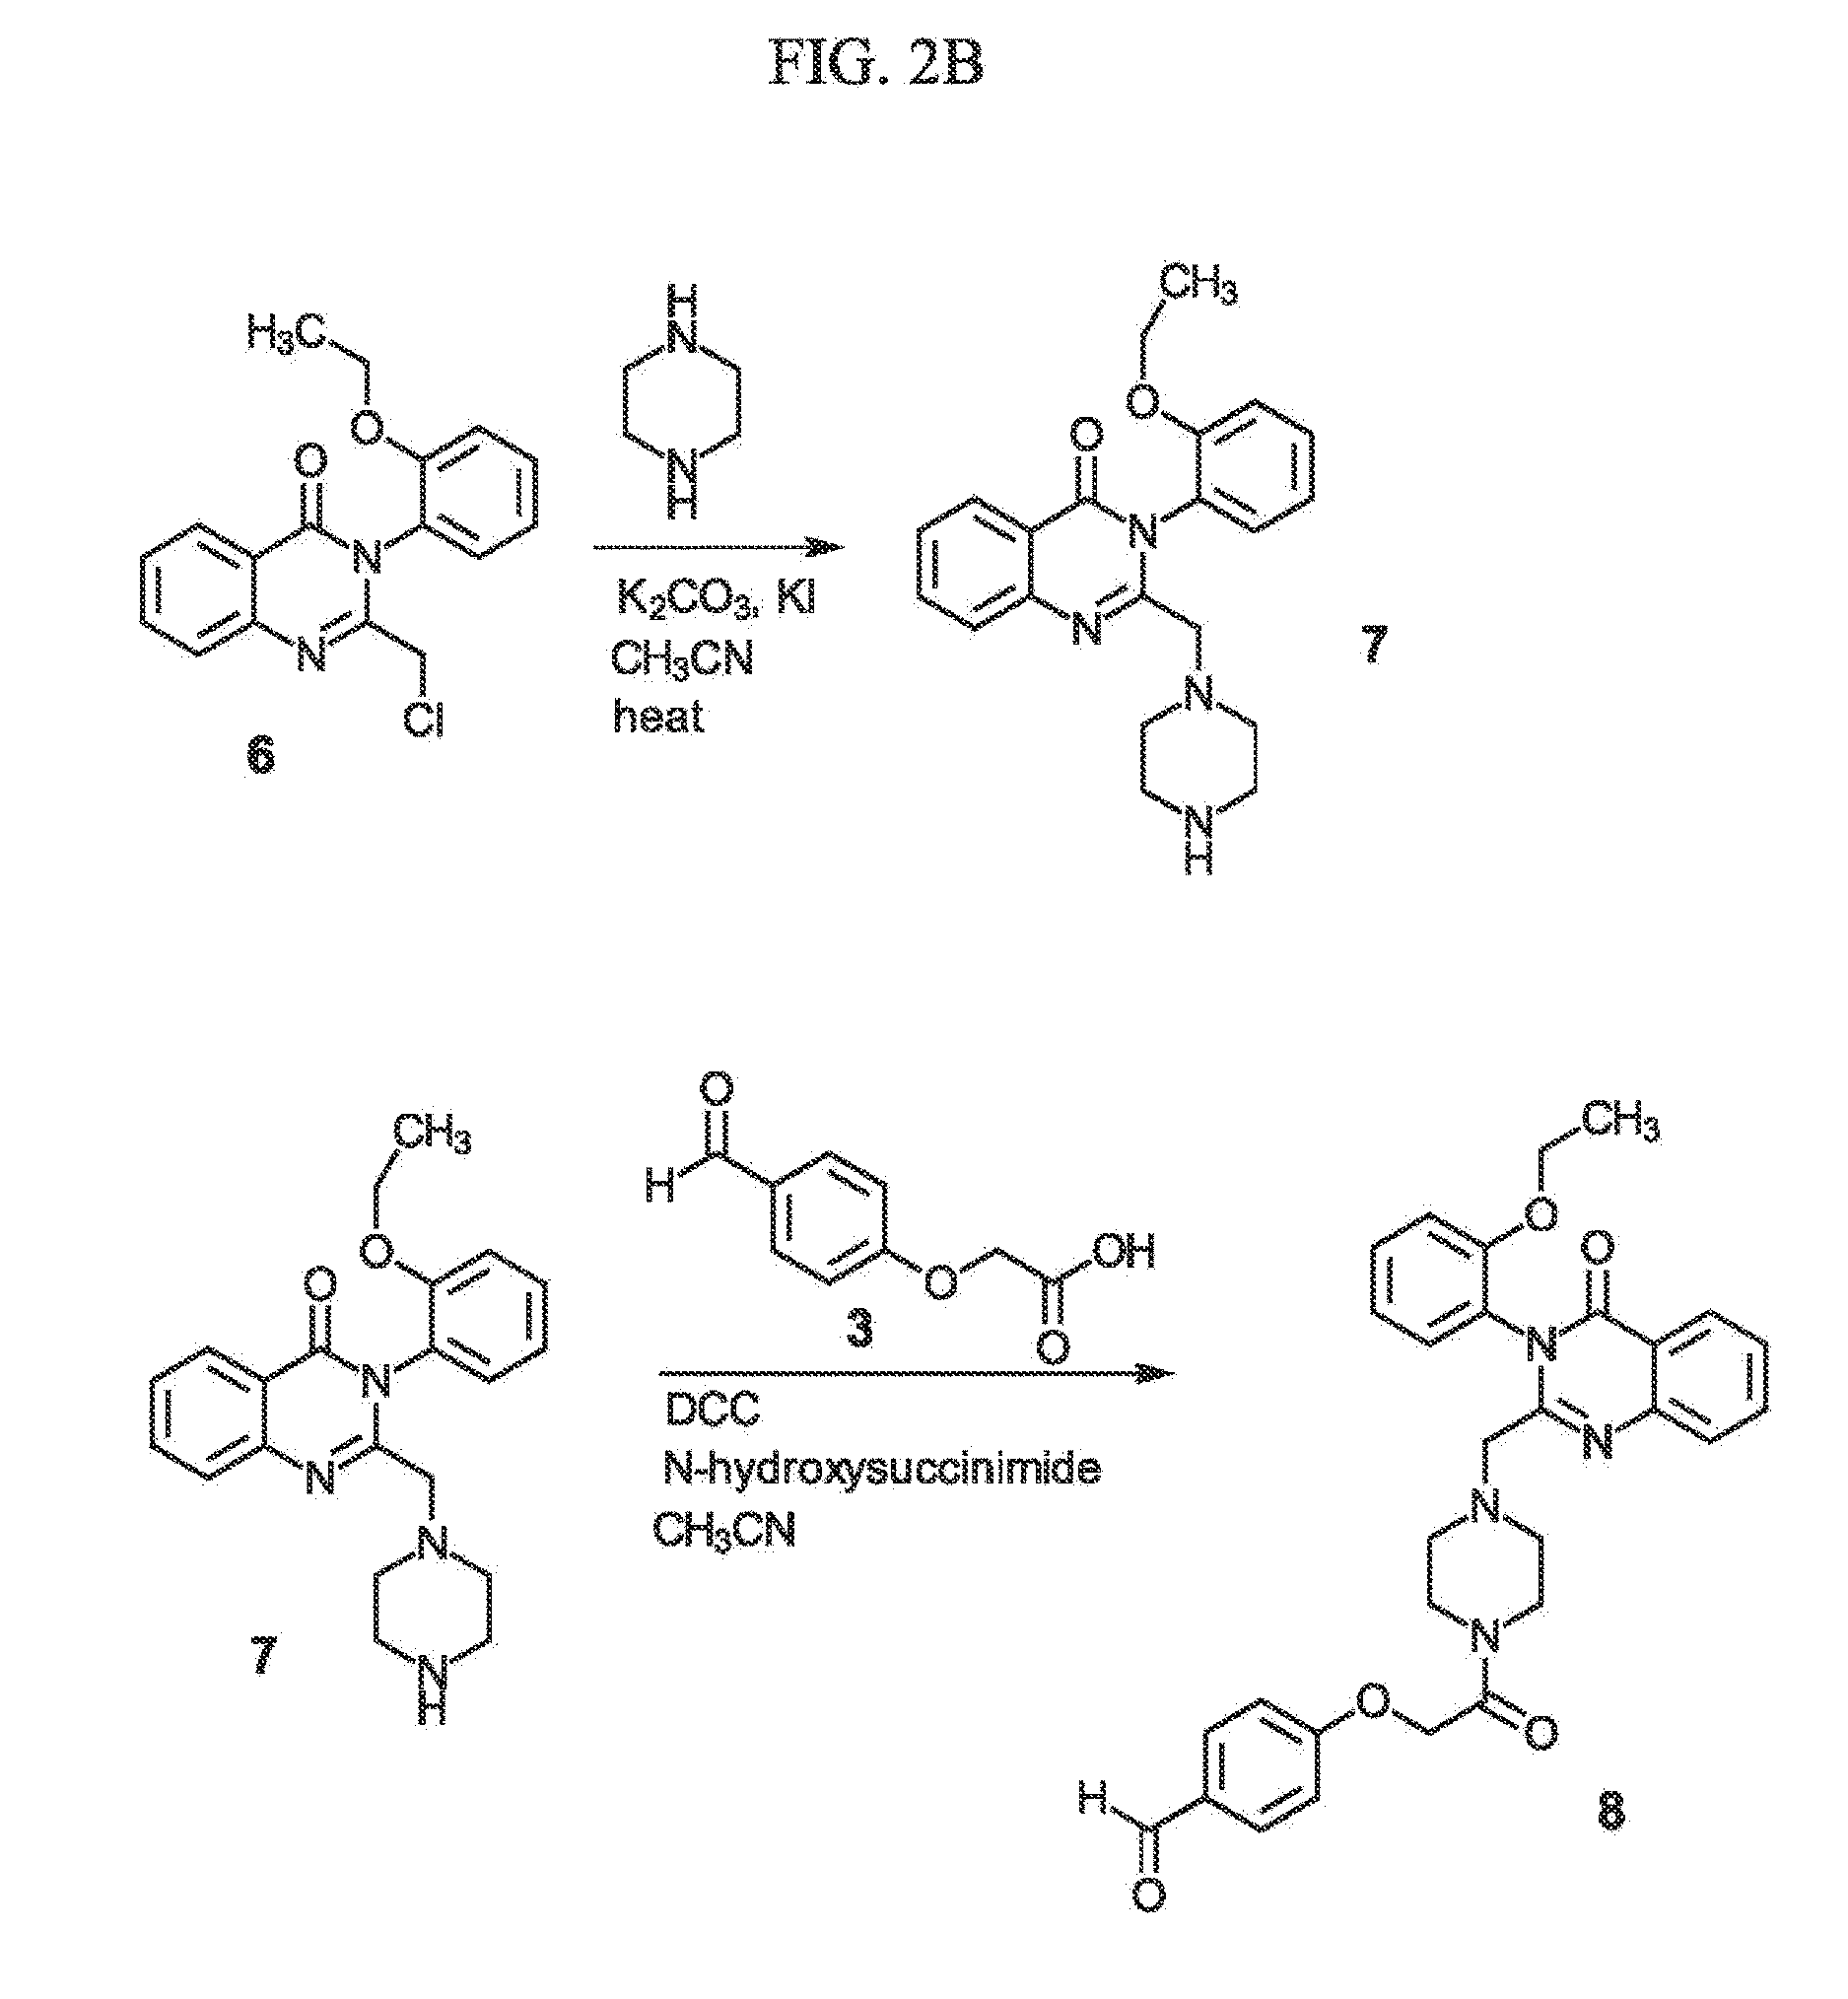 Sigma-2 receptor ligand drug conjugates as antitumor compounds, methods of synthesis and uses thereof